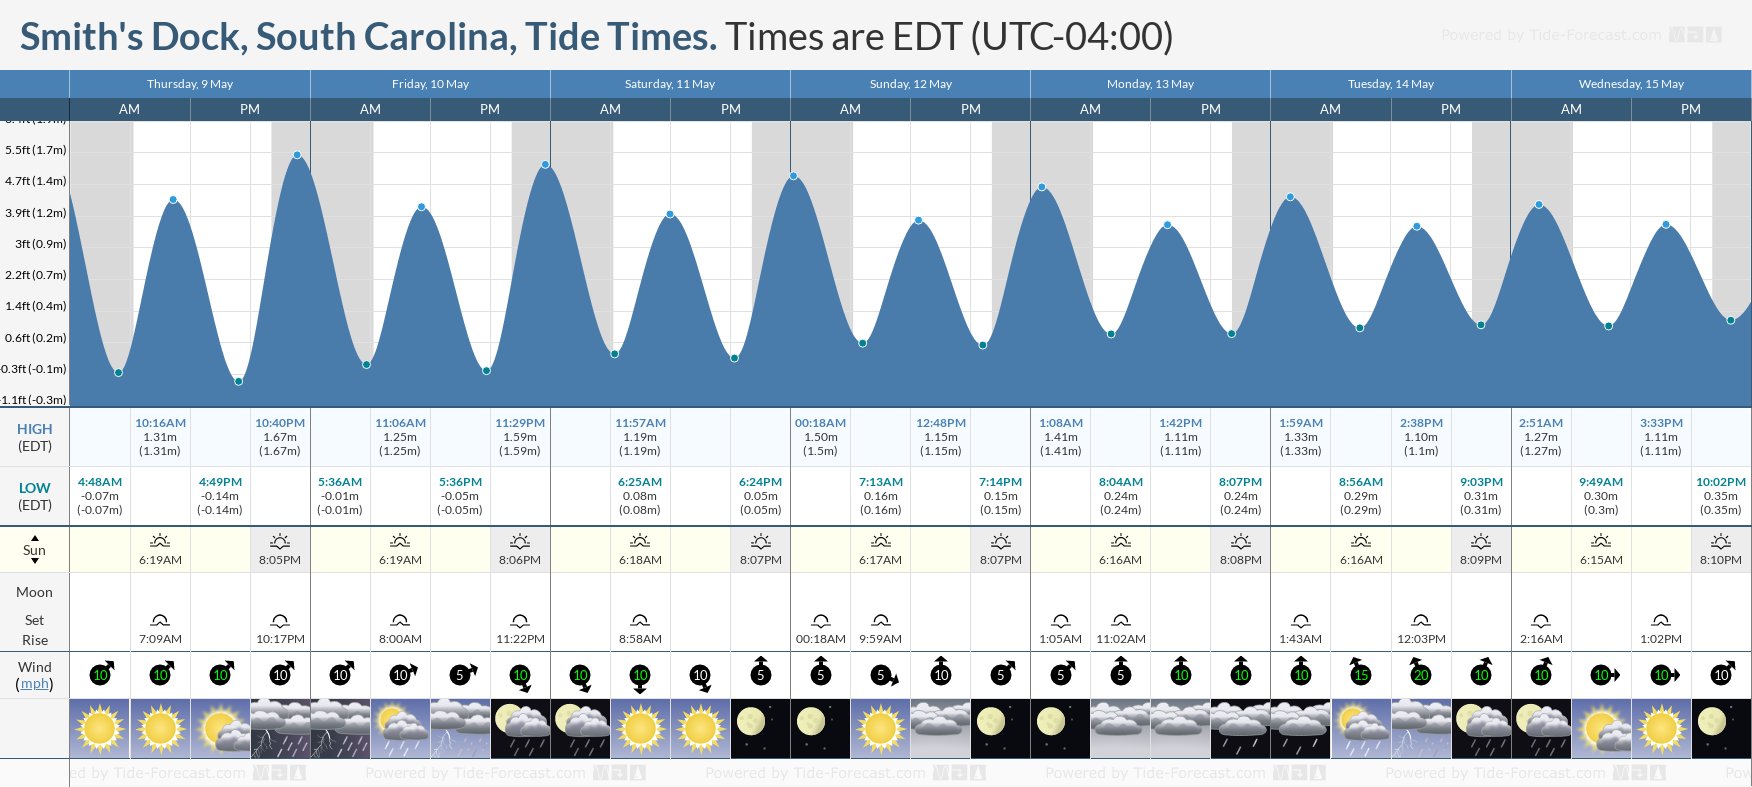 Smith's Dock, South Carolina Tide Chart including high and low tide tide times for the next 7 days